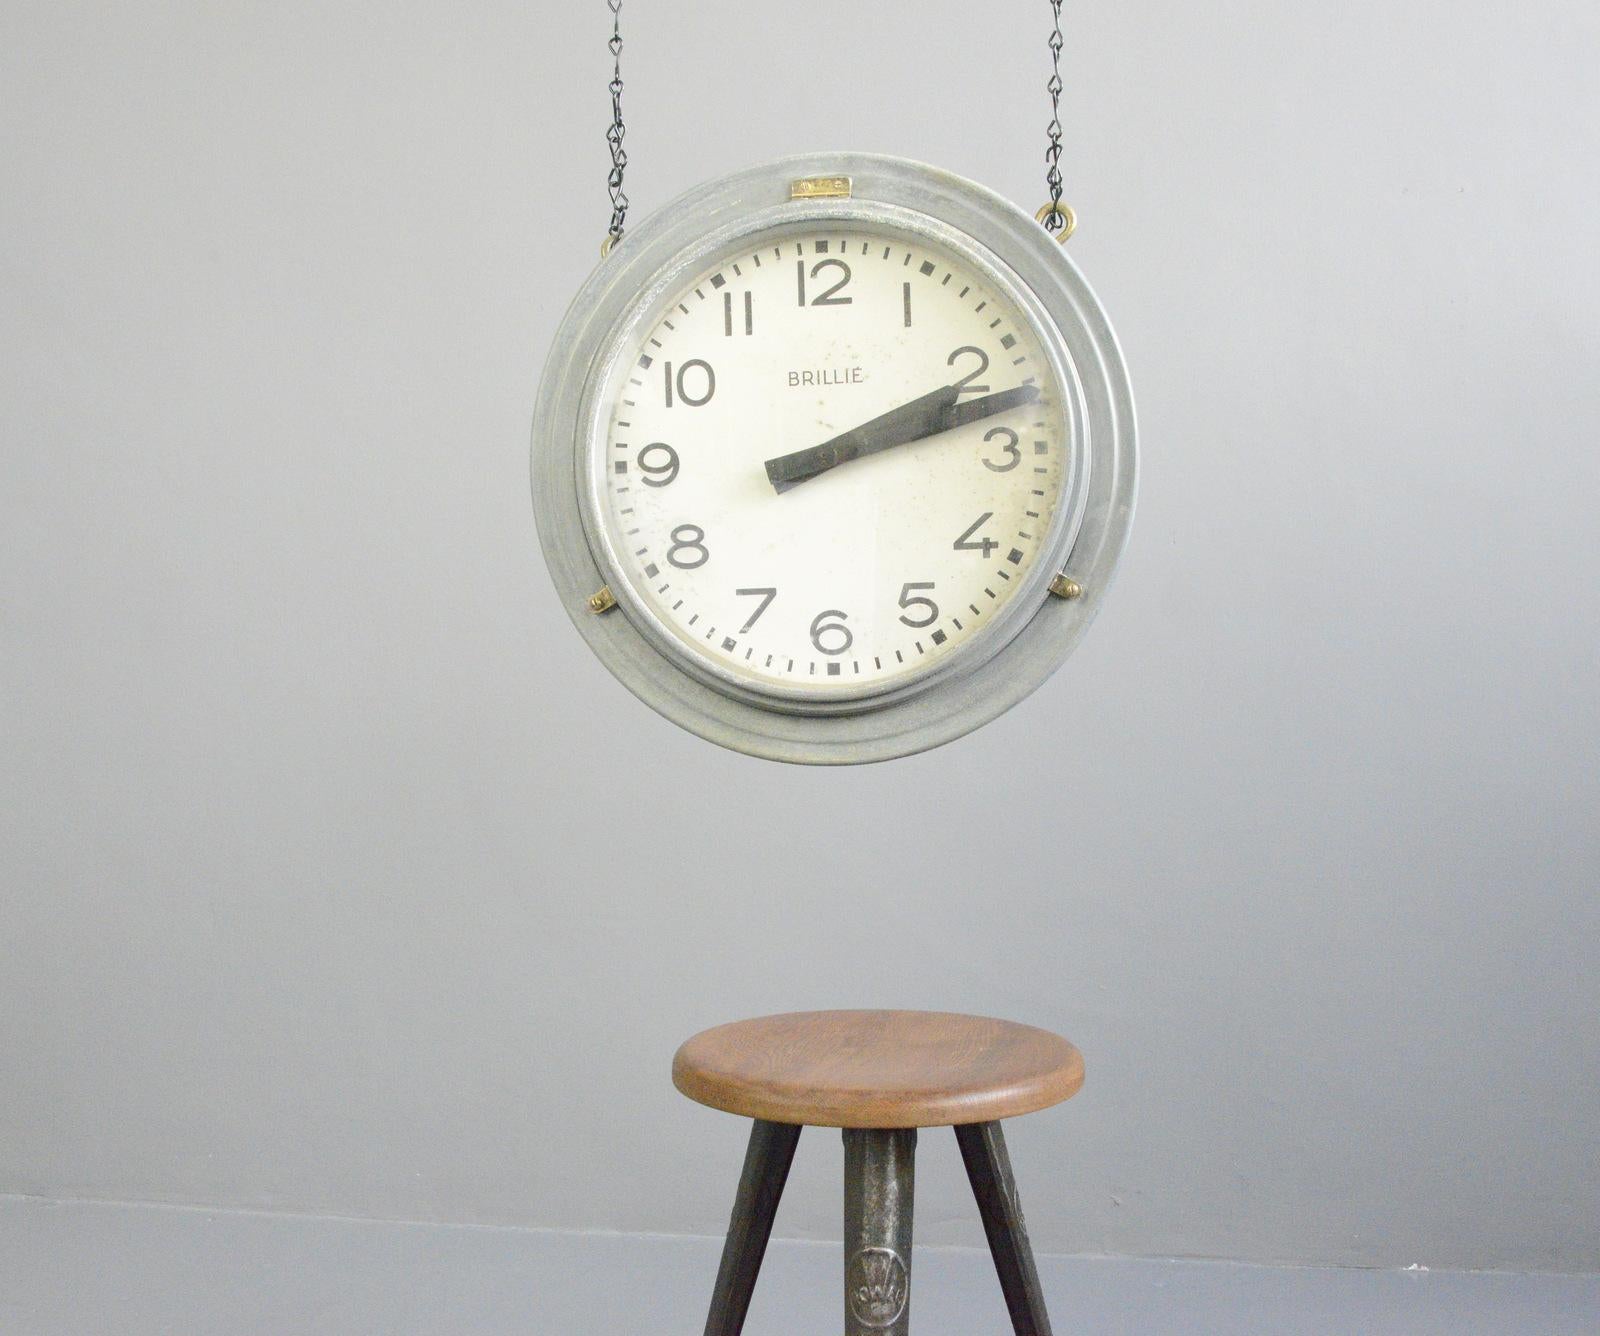 Double sided zinc station clock by Brillie, Circa 1920s

- Zinc casing
- Tin dials
- Glass faces
- New AA battery powered quartz motors
- Comes with chain 
- Made by Brillie
- French ~ 1920s
- 54cm wide x 54cm tall x 20cm deep

Condition